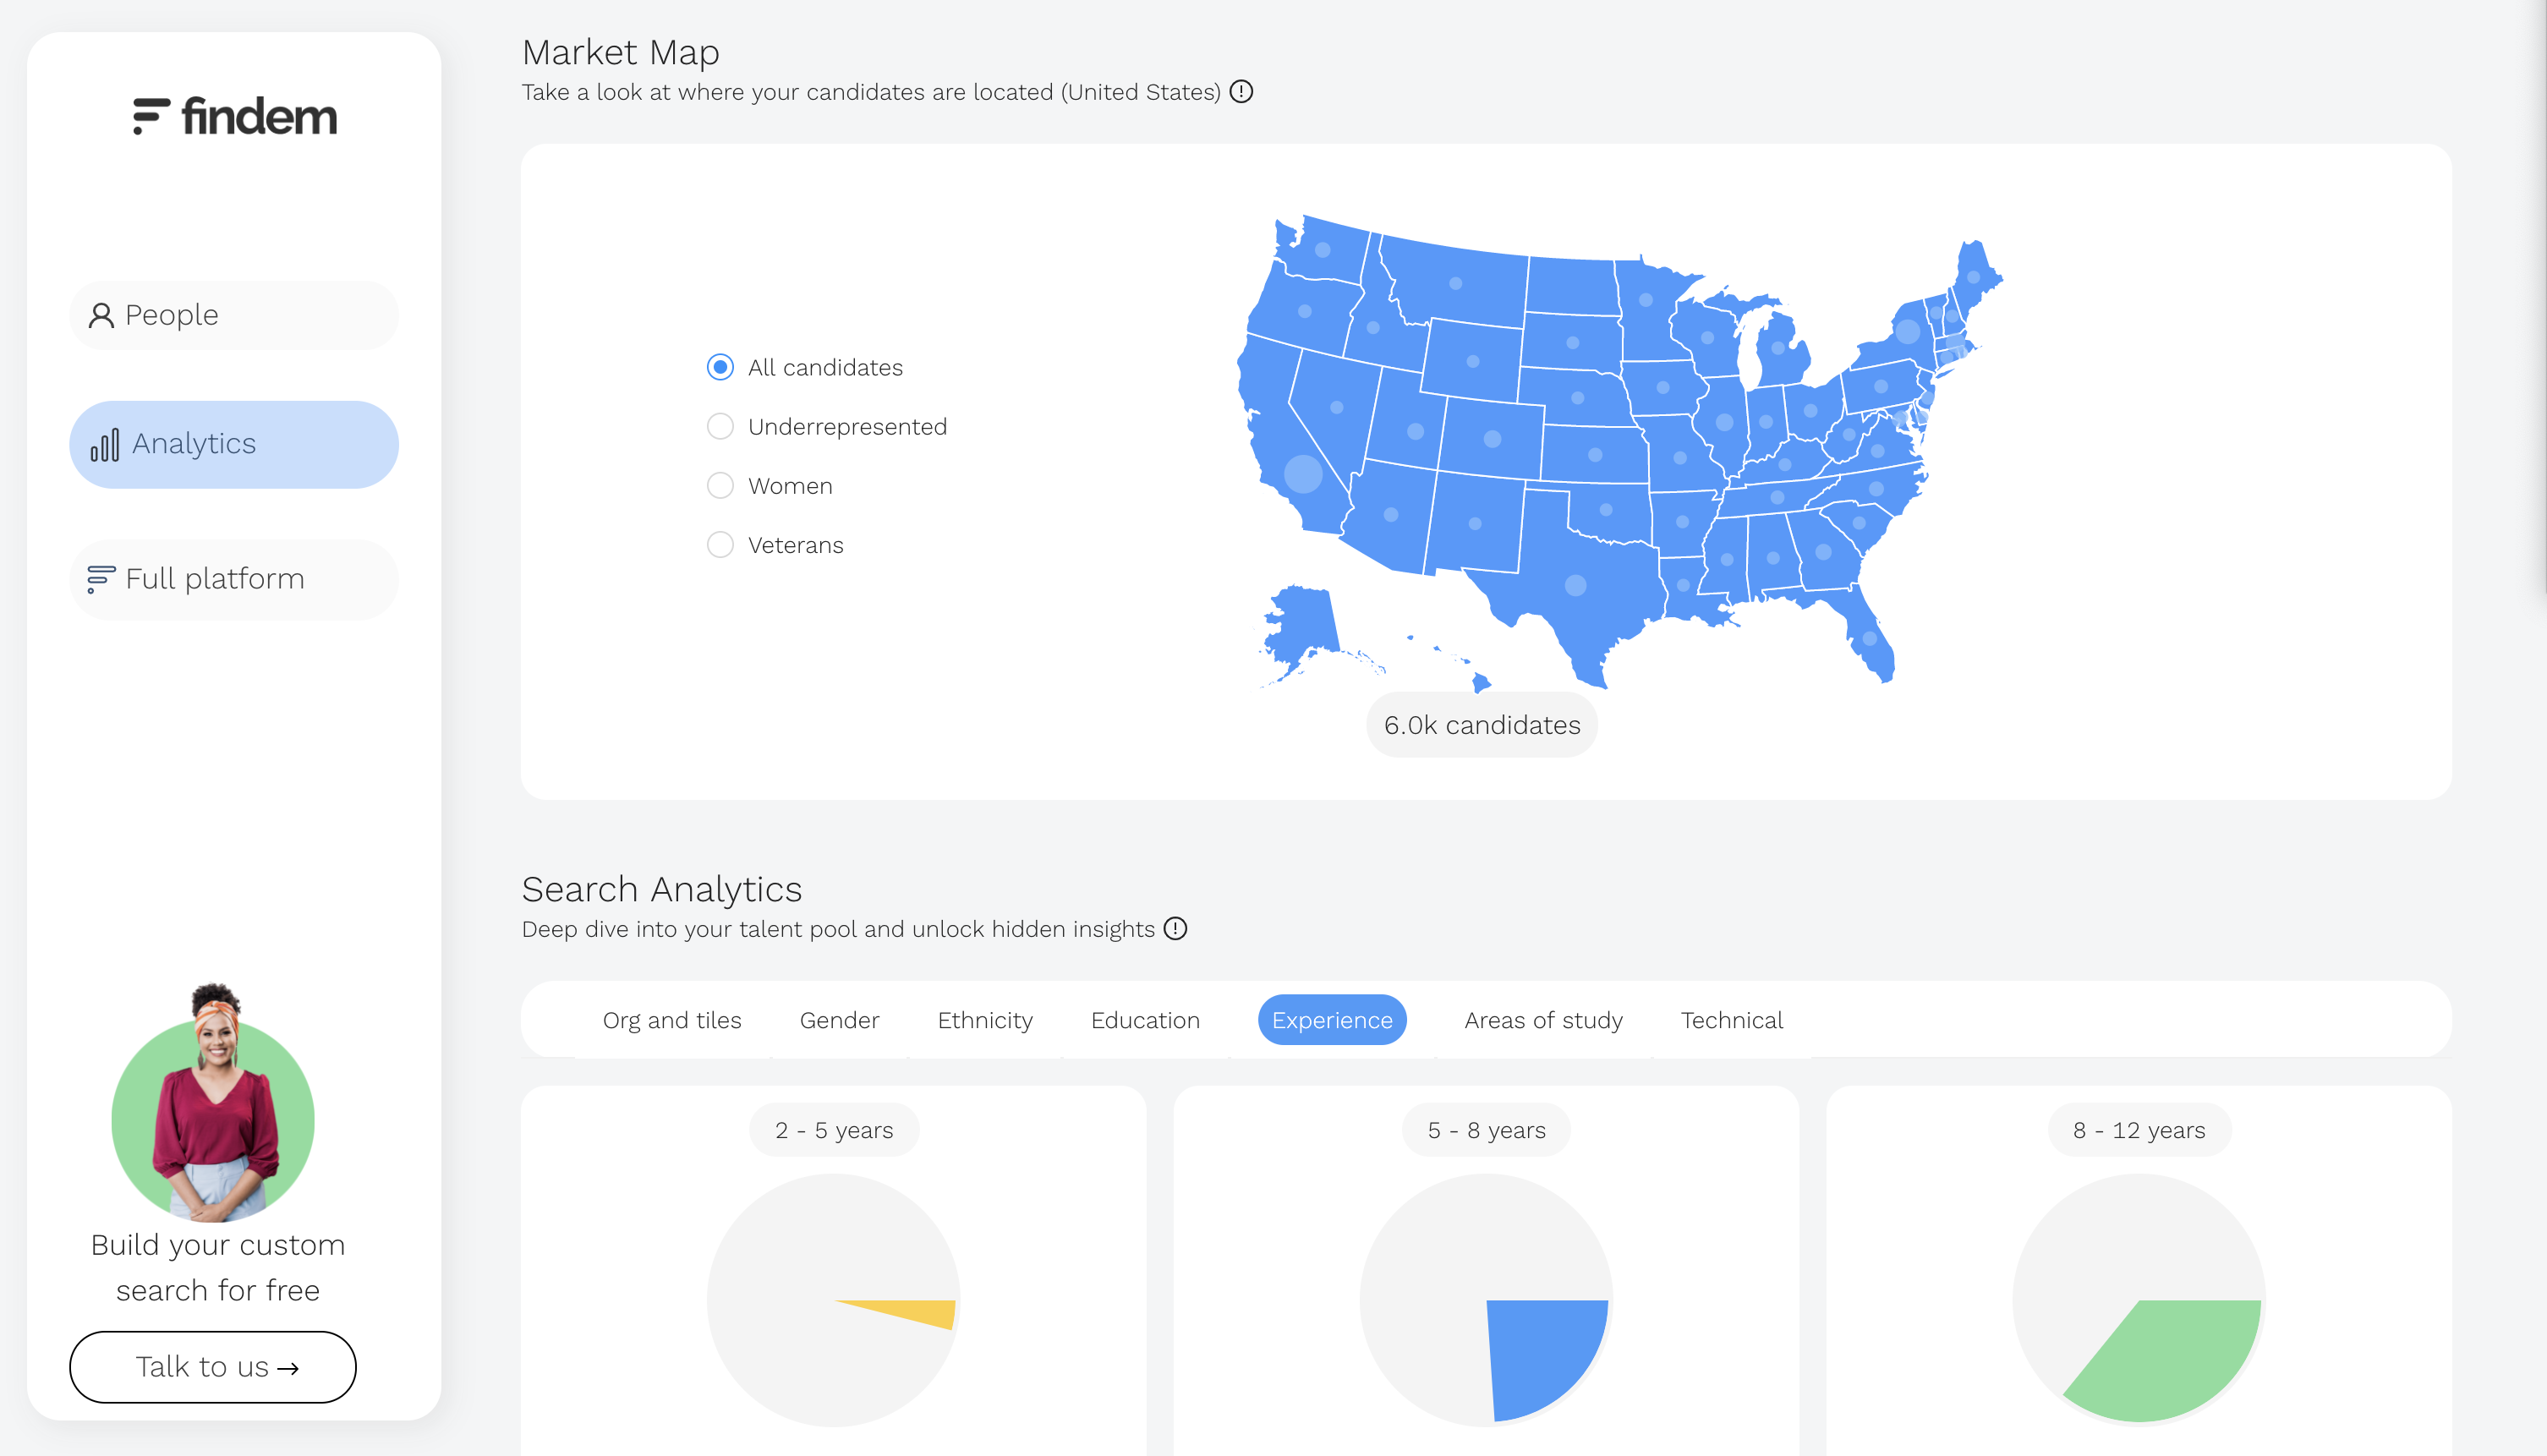 Findem Impossible Search Analytics